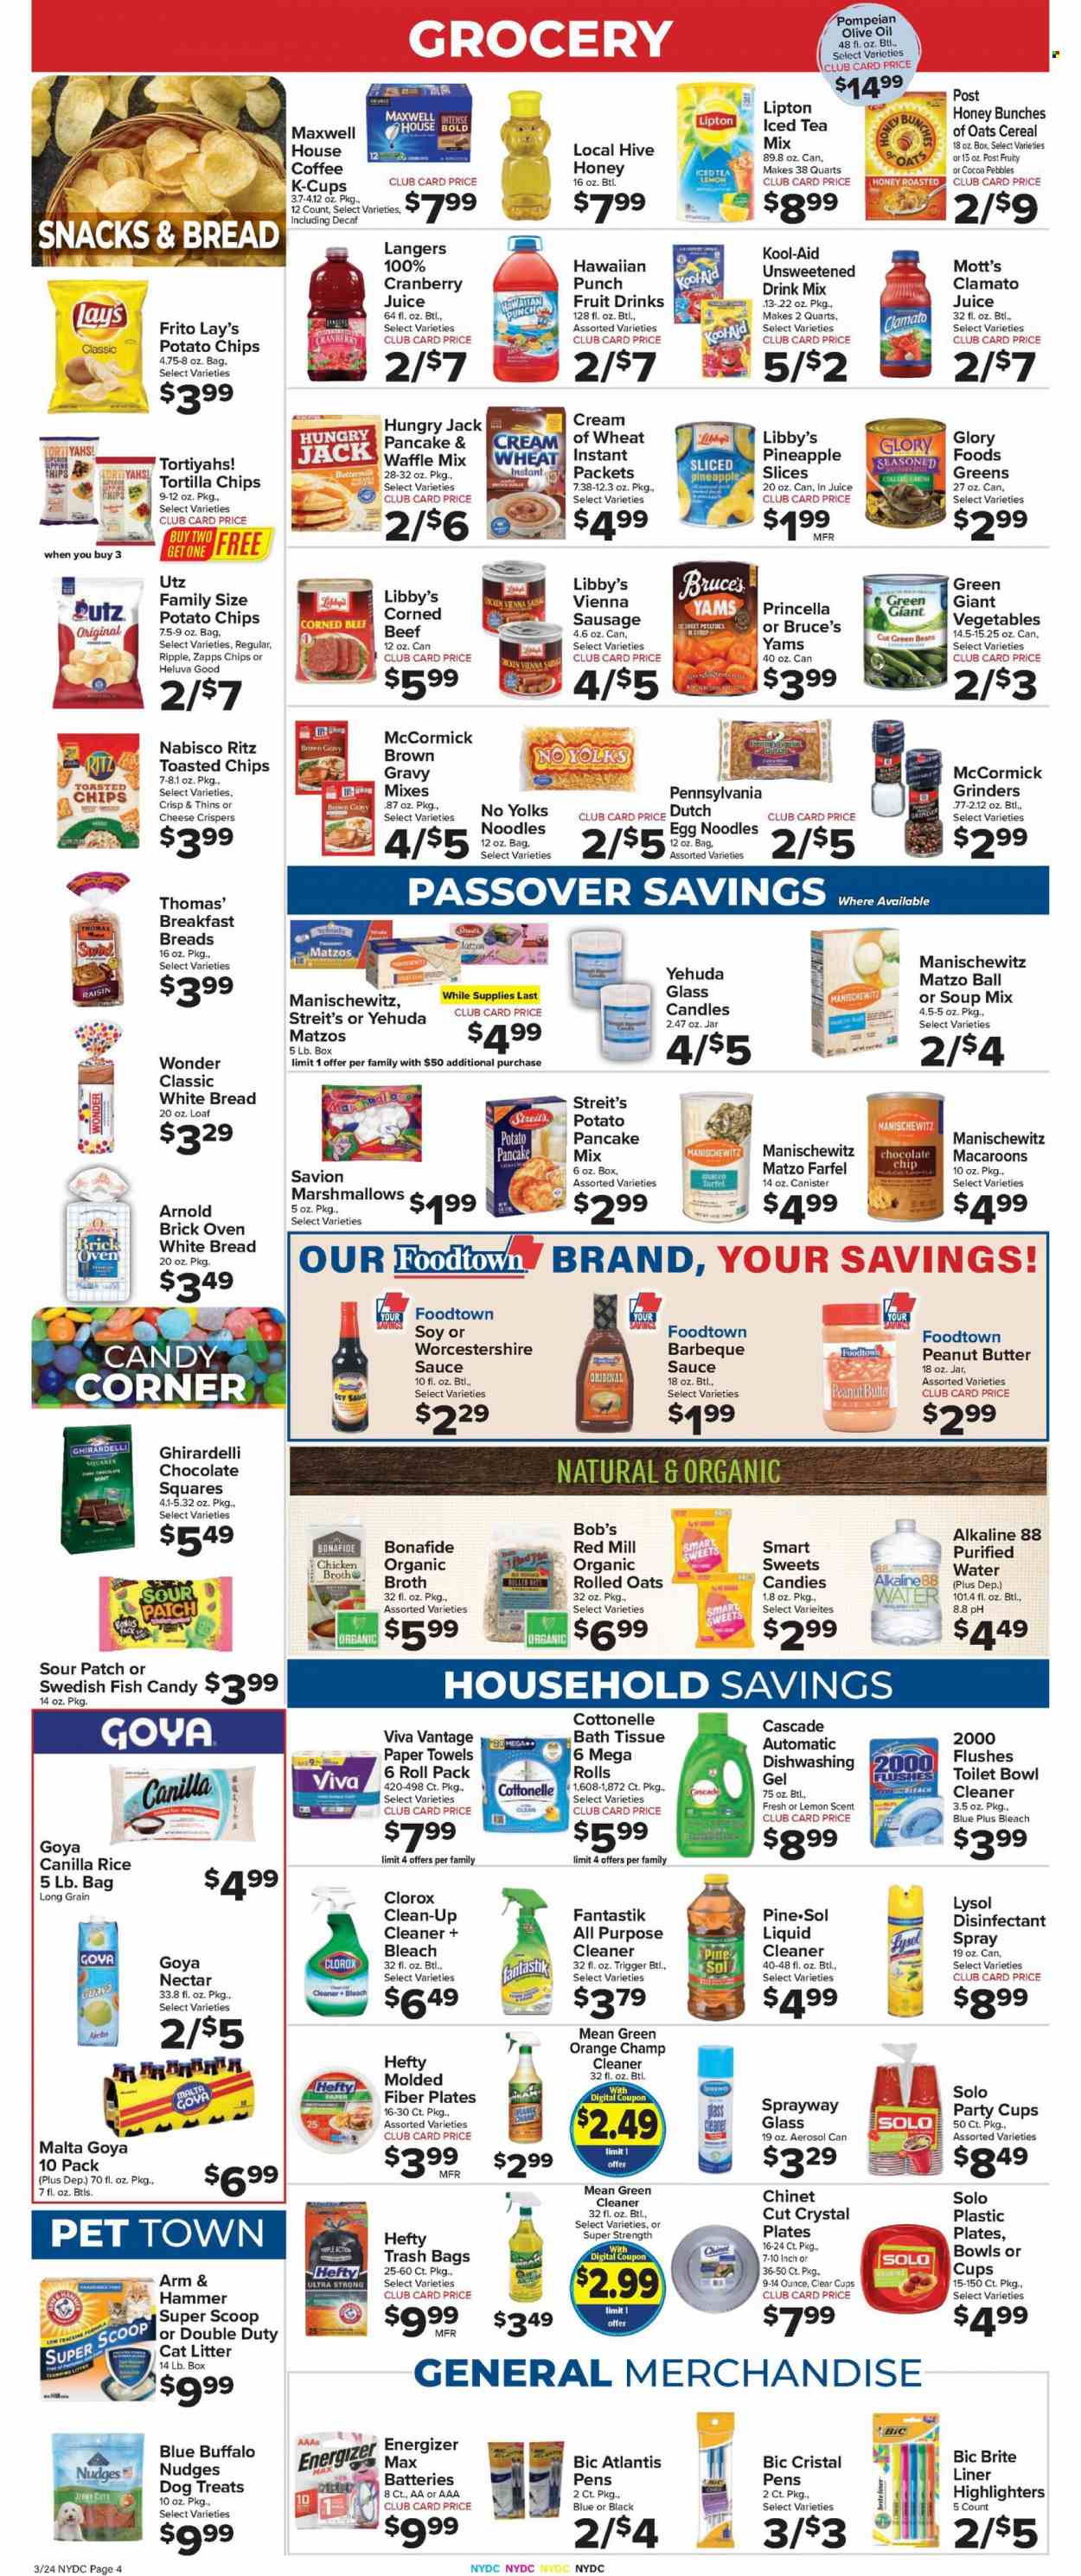 thumbnail - Foodtown Flyer - 03/24/2023 - 03/30/2023 - Sales products - bread, white bread, collard greens, green beans, sweet potato, pineapple, oranges, Mott's, soup mix, soup, sauce, pancakes, noodles, sausage, vienna sausage, corned beef, buttermilk, marshmallows, chocolate, snack, dark chocolate, Savion, Ghirardelli, Sour Patch, RITZ, tortilla chips, potato chips, chips, Lay’s, Thins, ARM & HAMMER, cane sugar, broth, Goya, cereals, Cream of Wheat, rolled oats, rice, egg noodles, BBQ sauce, worcestershire sauce, olive oil, oil, peanut butter, cranberry juice, juice, Lipton, ice tea, Clamato, purified water, water, Maxwell House, coffee, coffee capsules, K-Cups, chicken, beef meat, bath tissue, Cottonelle, kitchen towels, paper towels, cleaner, bleach, liquid cleaner, desinfection, all purpose cleaner, Lysol, glass cleaner, Clorox, Pine-Sol, Cascade, Brite, fragrance, BIC, antibacterial spray, Hefty, trash bags, plate, candle, plastic plate, party cups, battery, Energizer, cat litter, Blue Buffalo. Page 6.